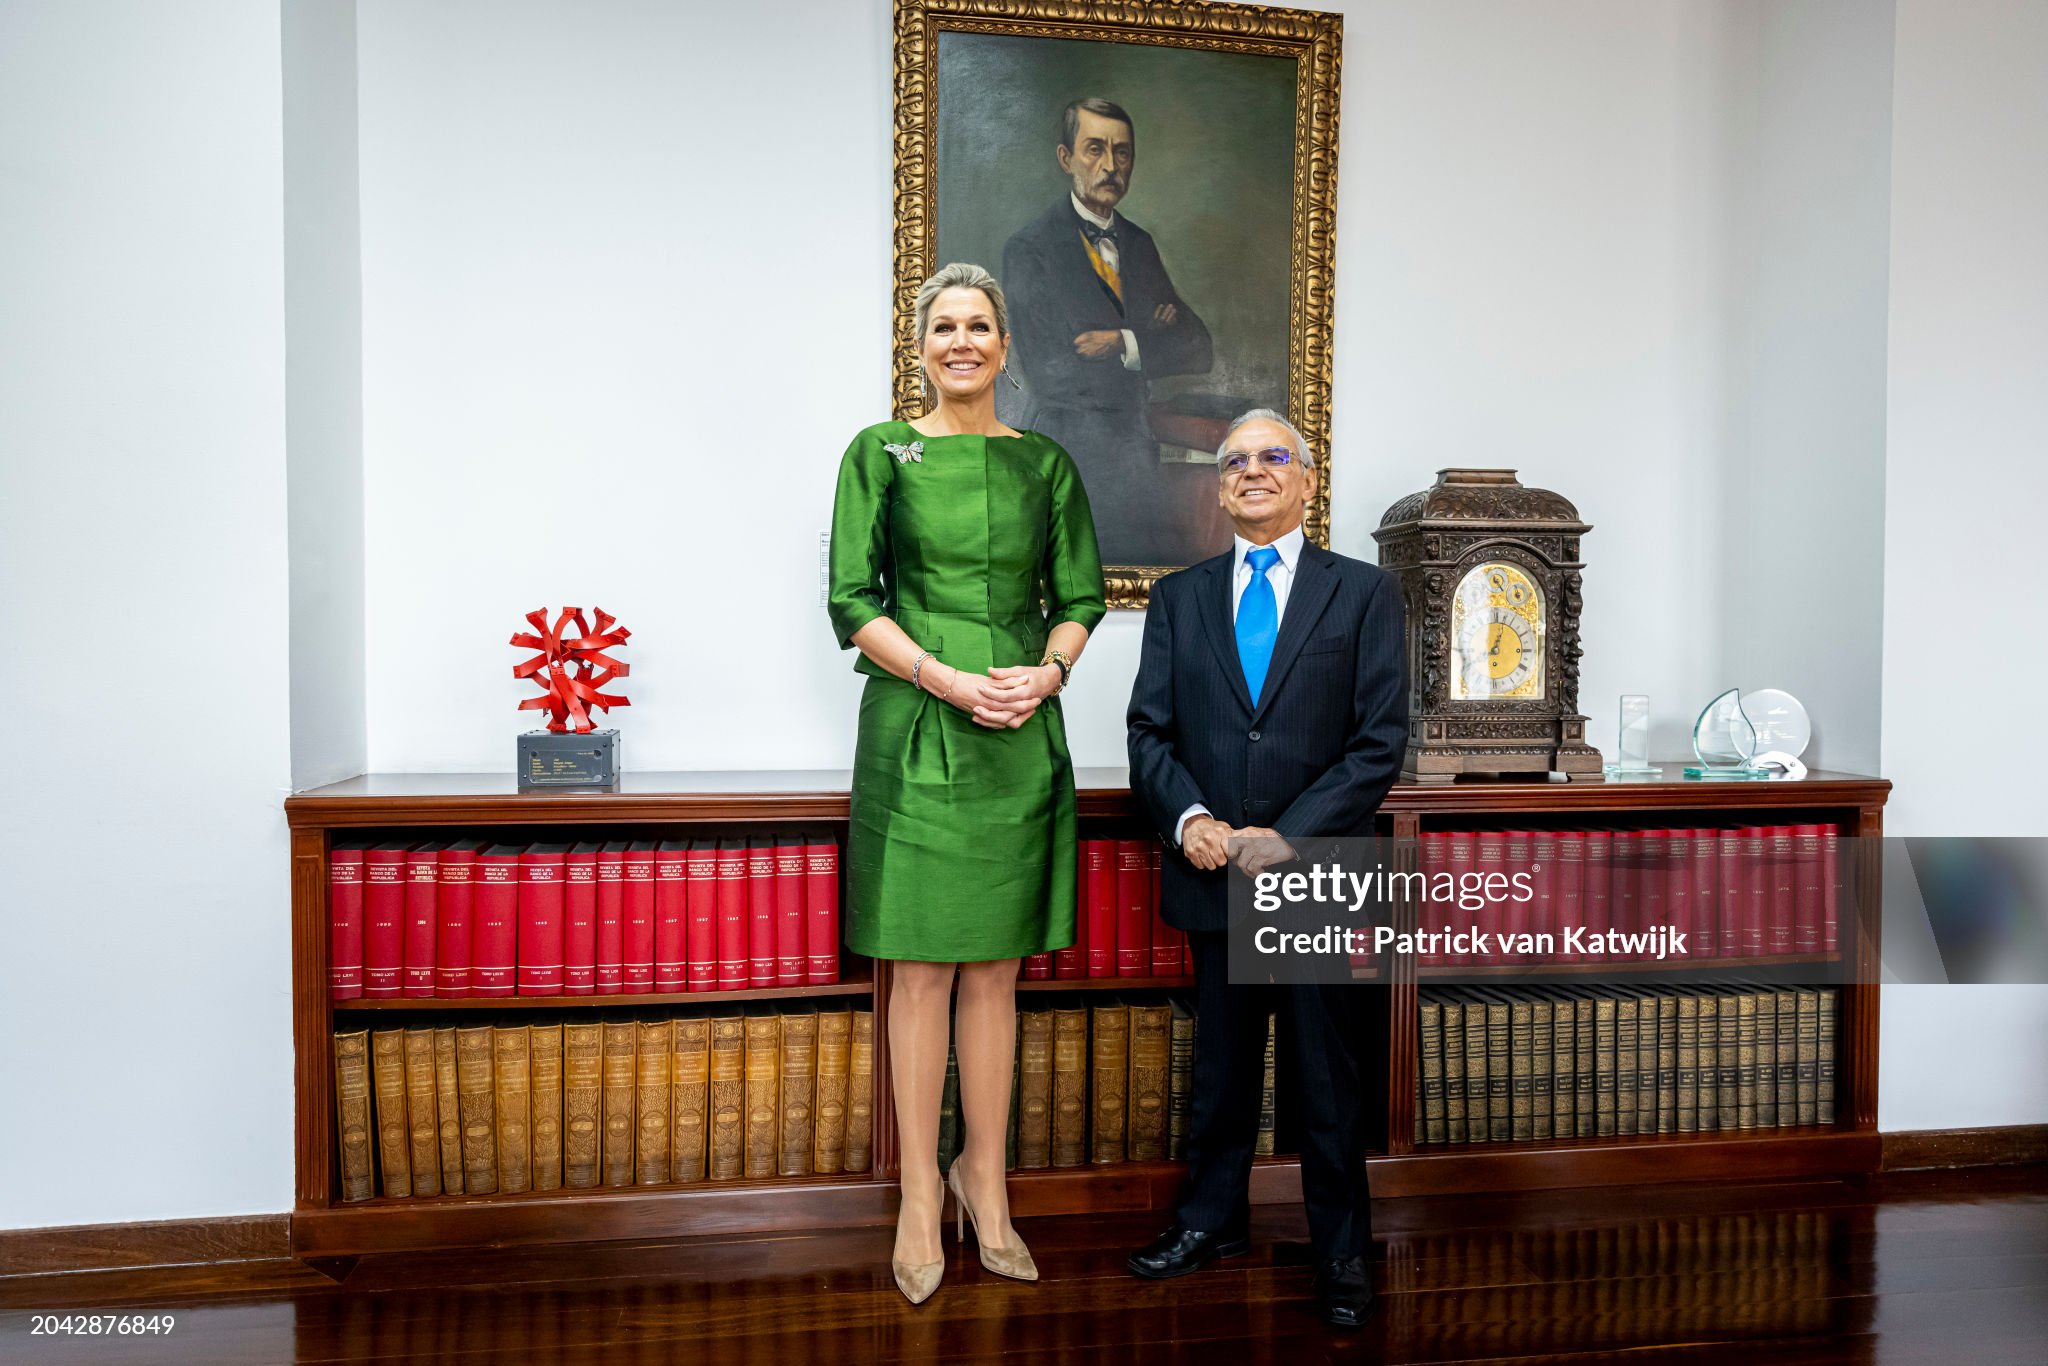 queen-maxima-of-the-netherlands-visits-colombia-day-two.jpg?s=2048x2048&w=gi&k=20&c=hfcNW4uRRRnEgjTS7IaD8cGWTxv46PSZ984EnkQMKLY=